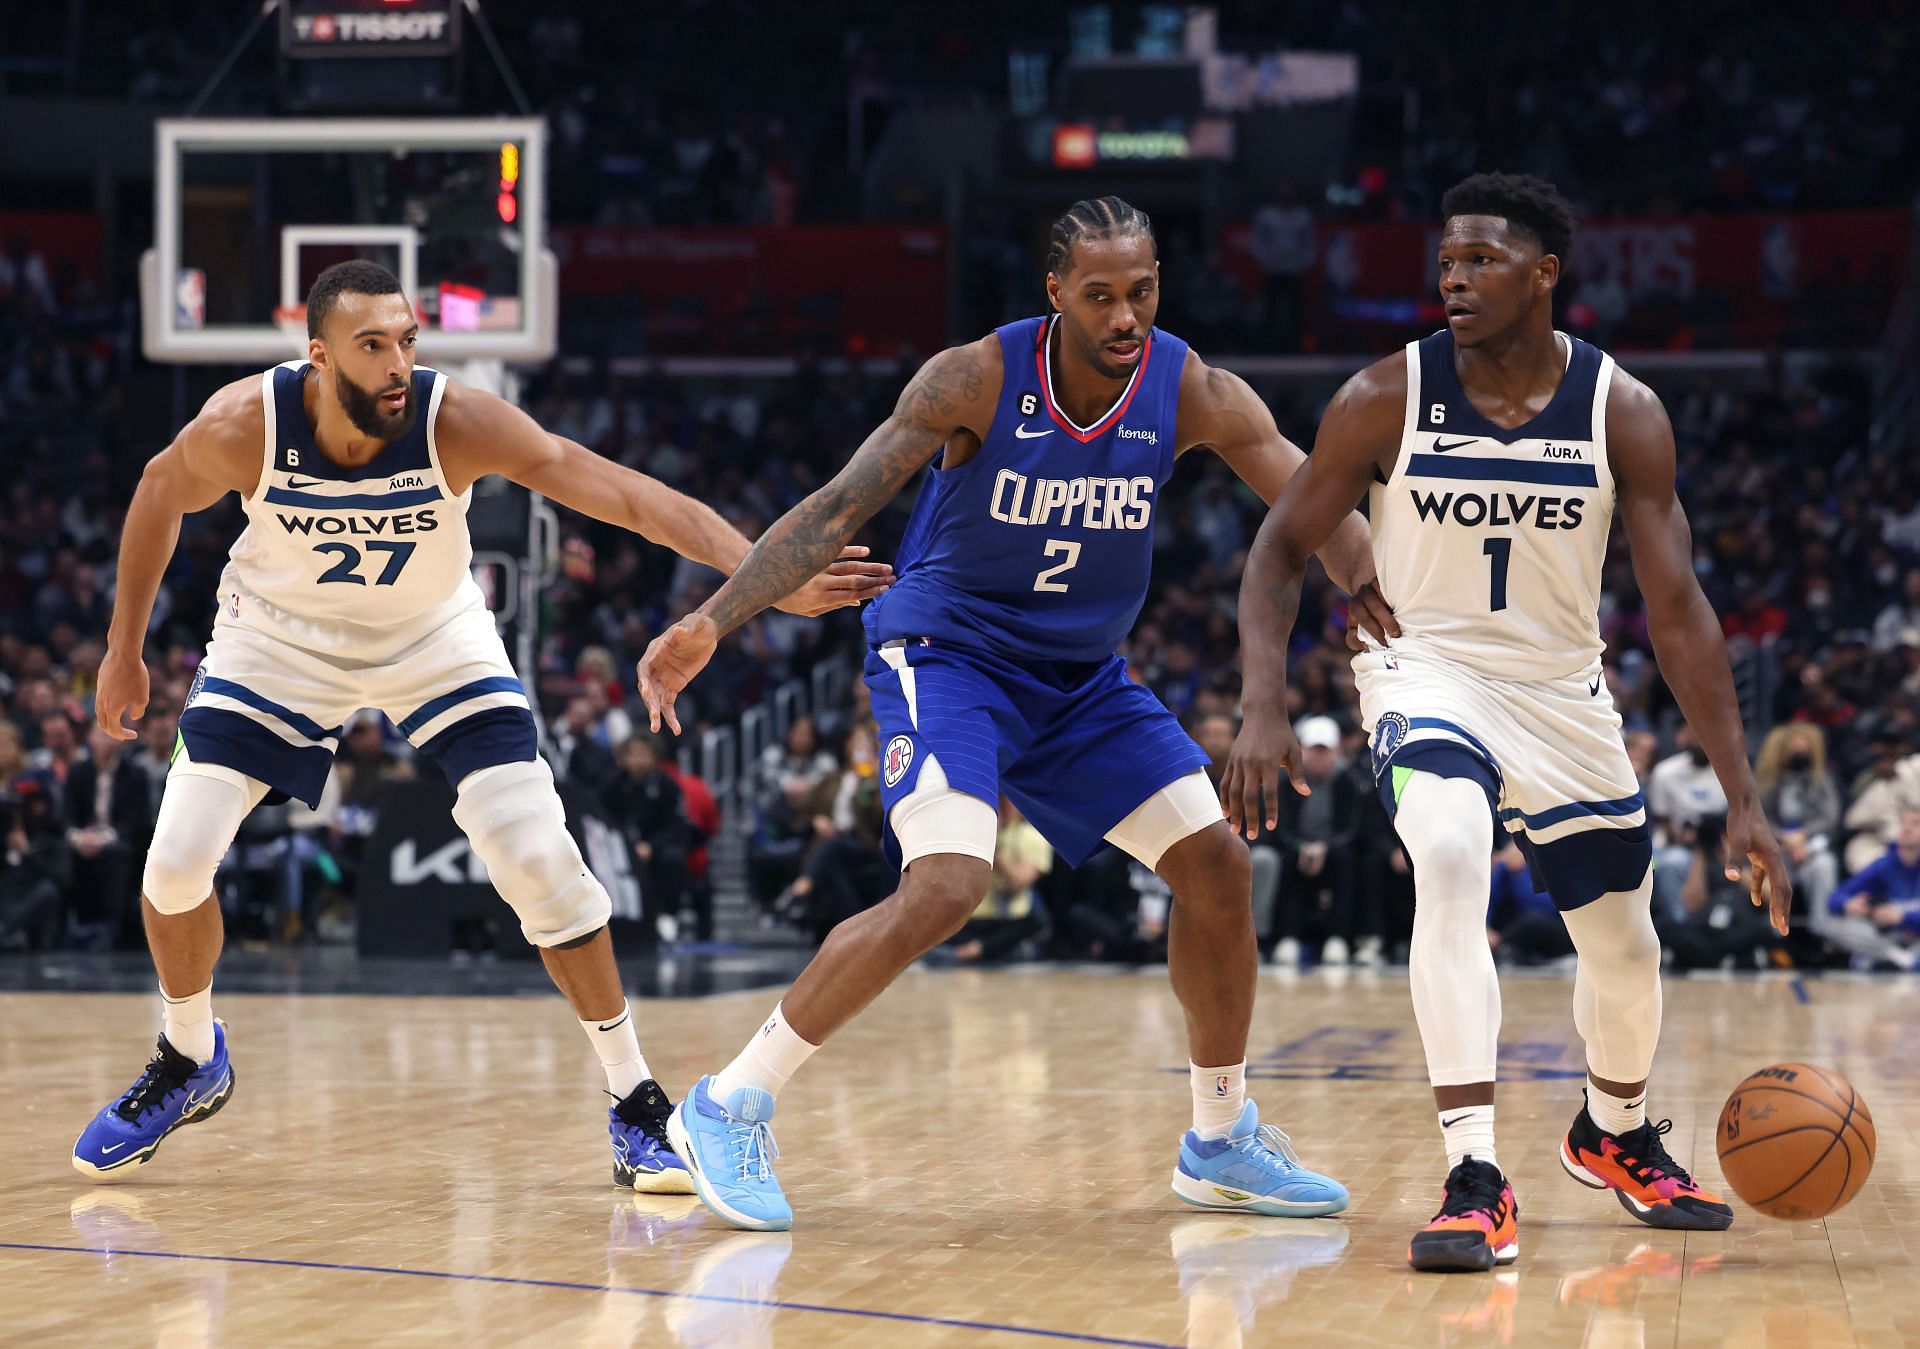 Minnesota Timberwolves vs LA Clippers Prediction, Starting Lineup and